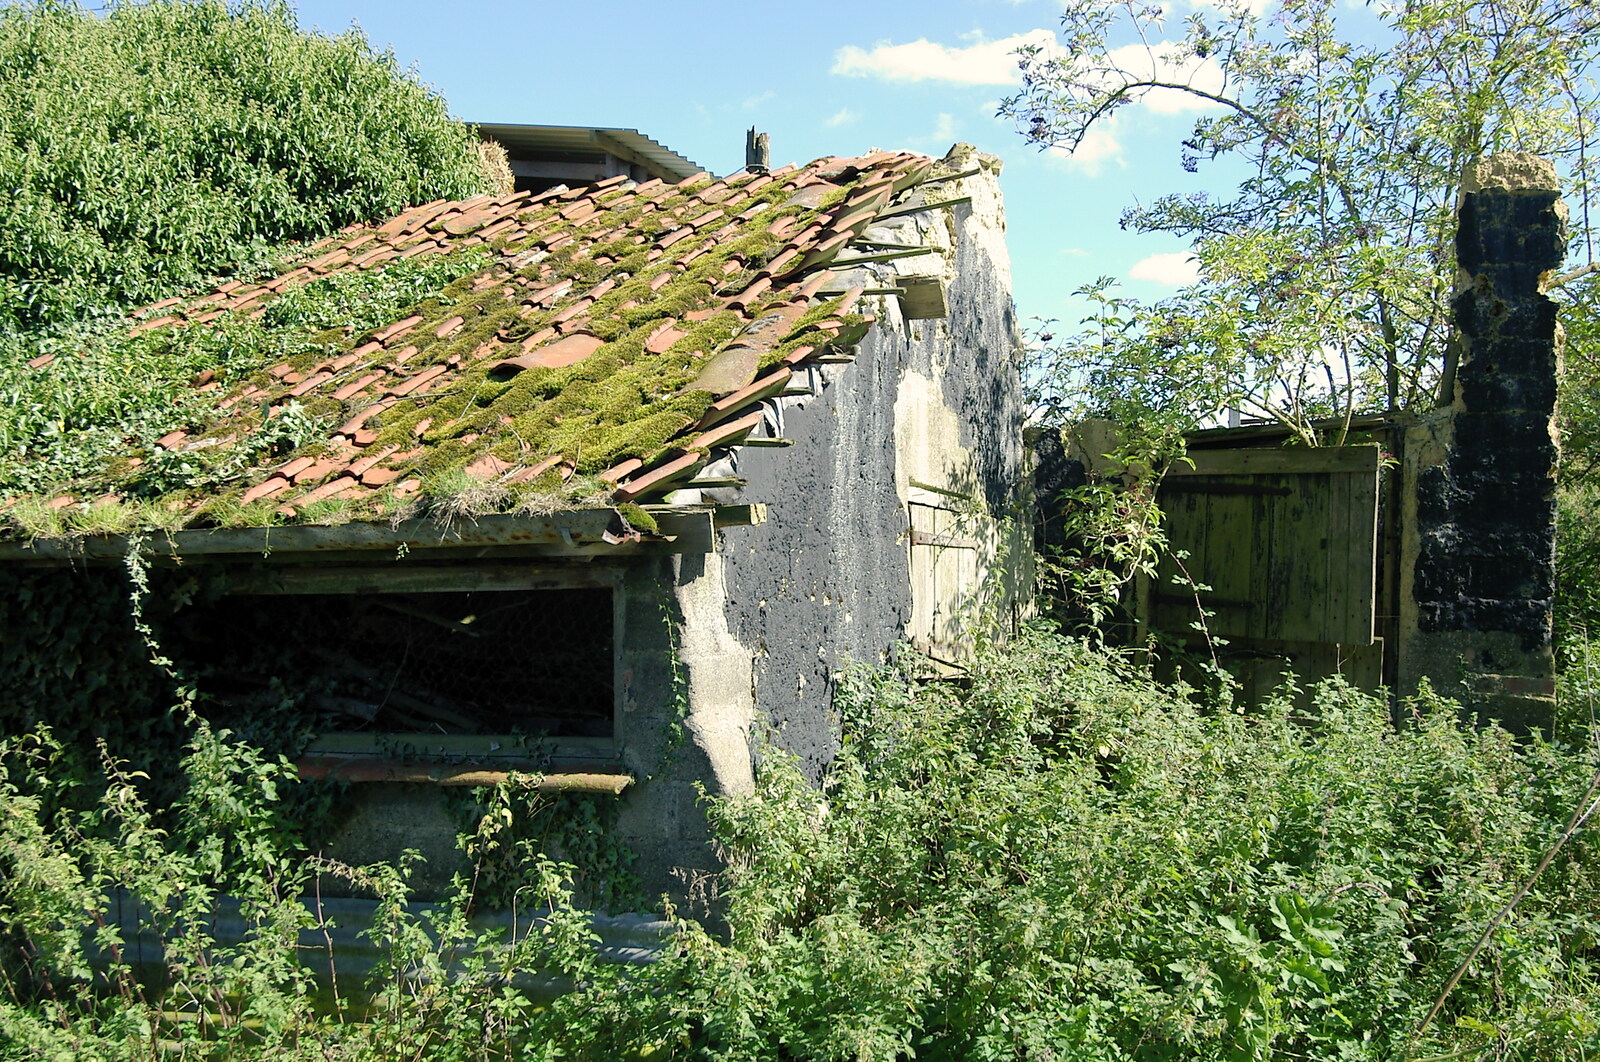 A derelict roof on Valley Farm from Life on the Neonatal Ward, Dairy Farm and Thrandeston Chapel, Suffolk - 26th August 2005